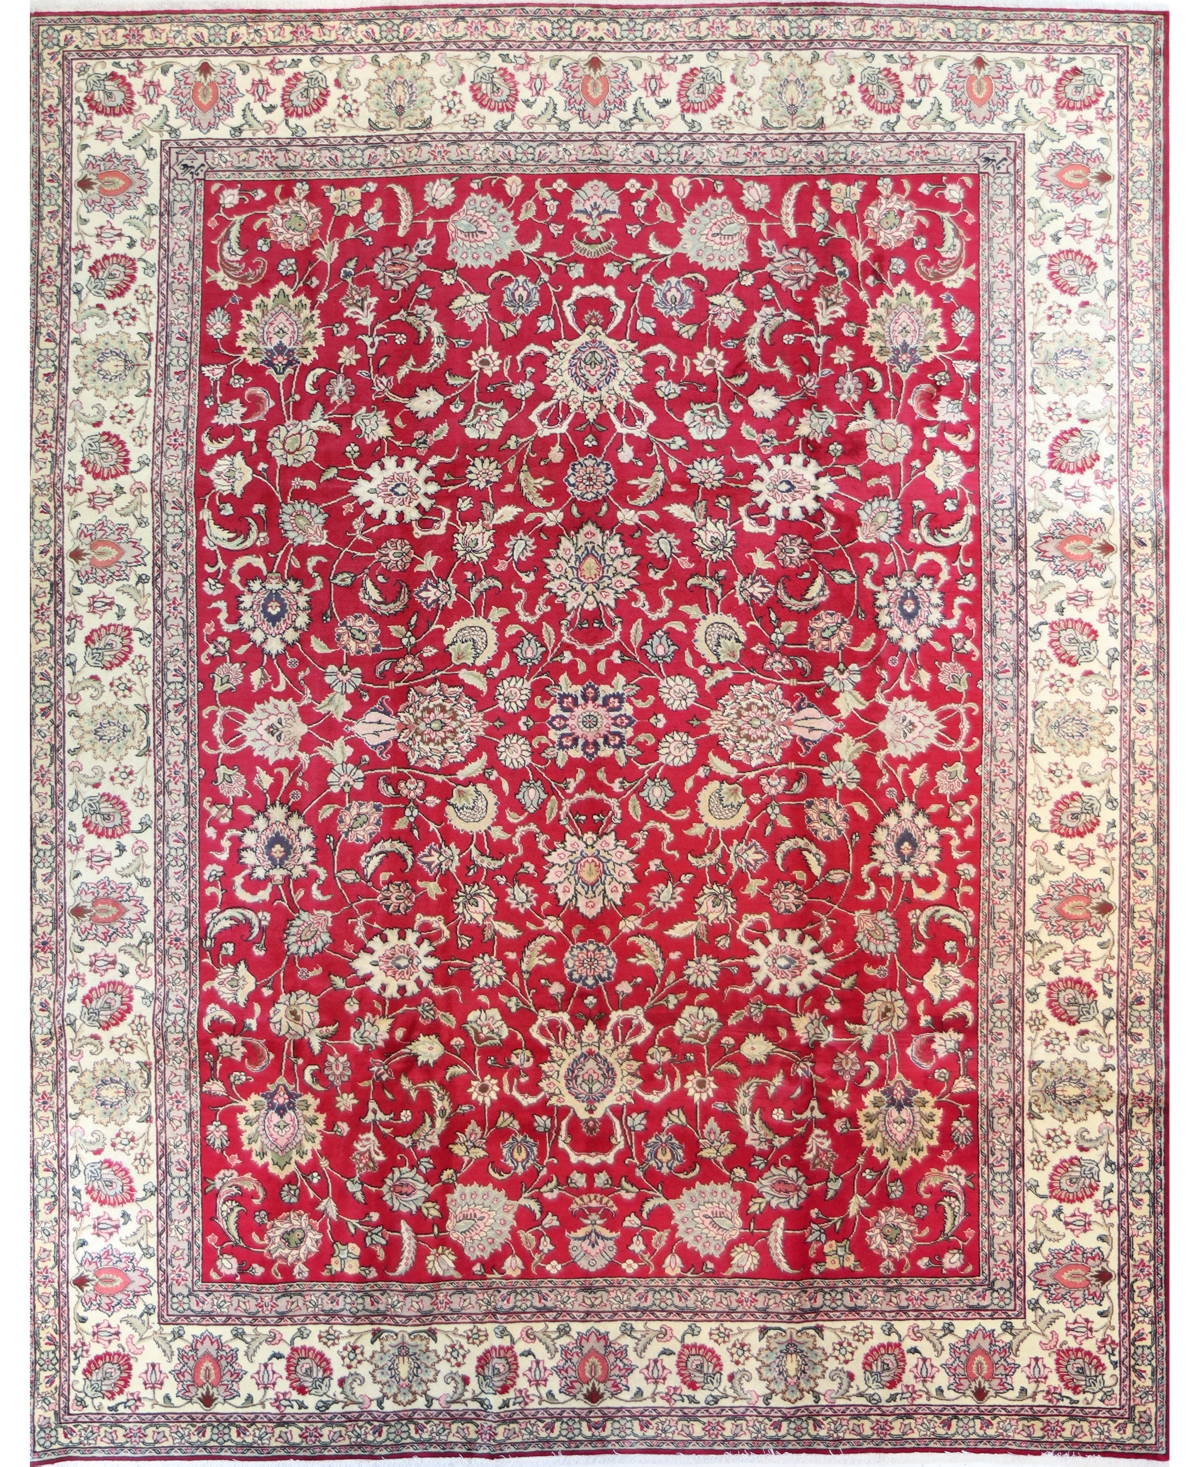 Bb Rugs One Of A Kind Tabriz 625522 9'9" X 12'8" Area Rug In Red